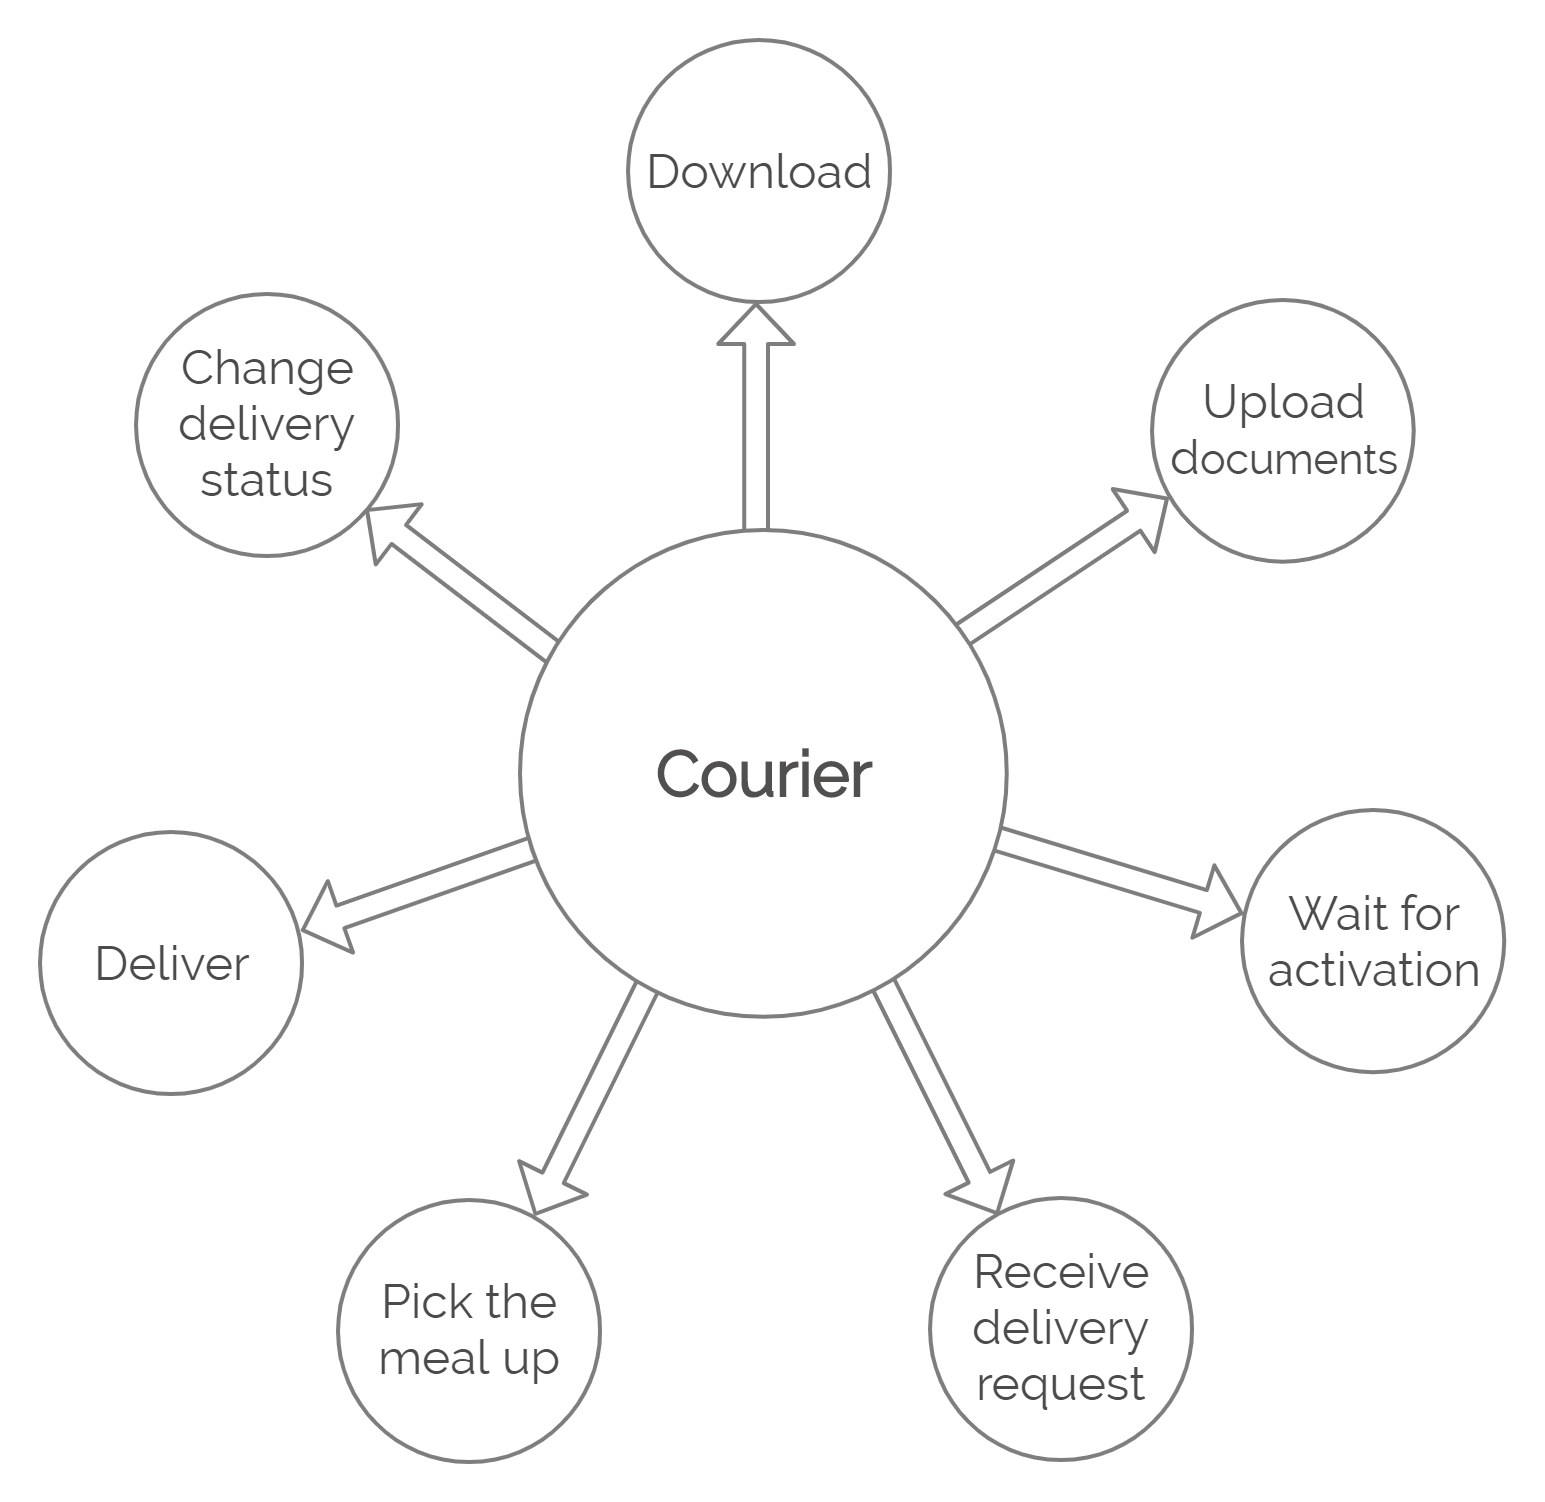 Courier's Actions